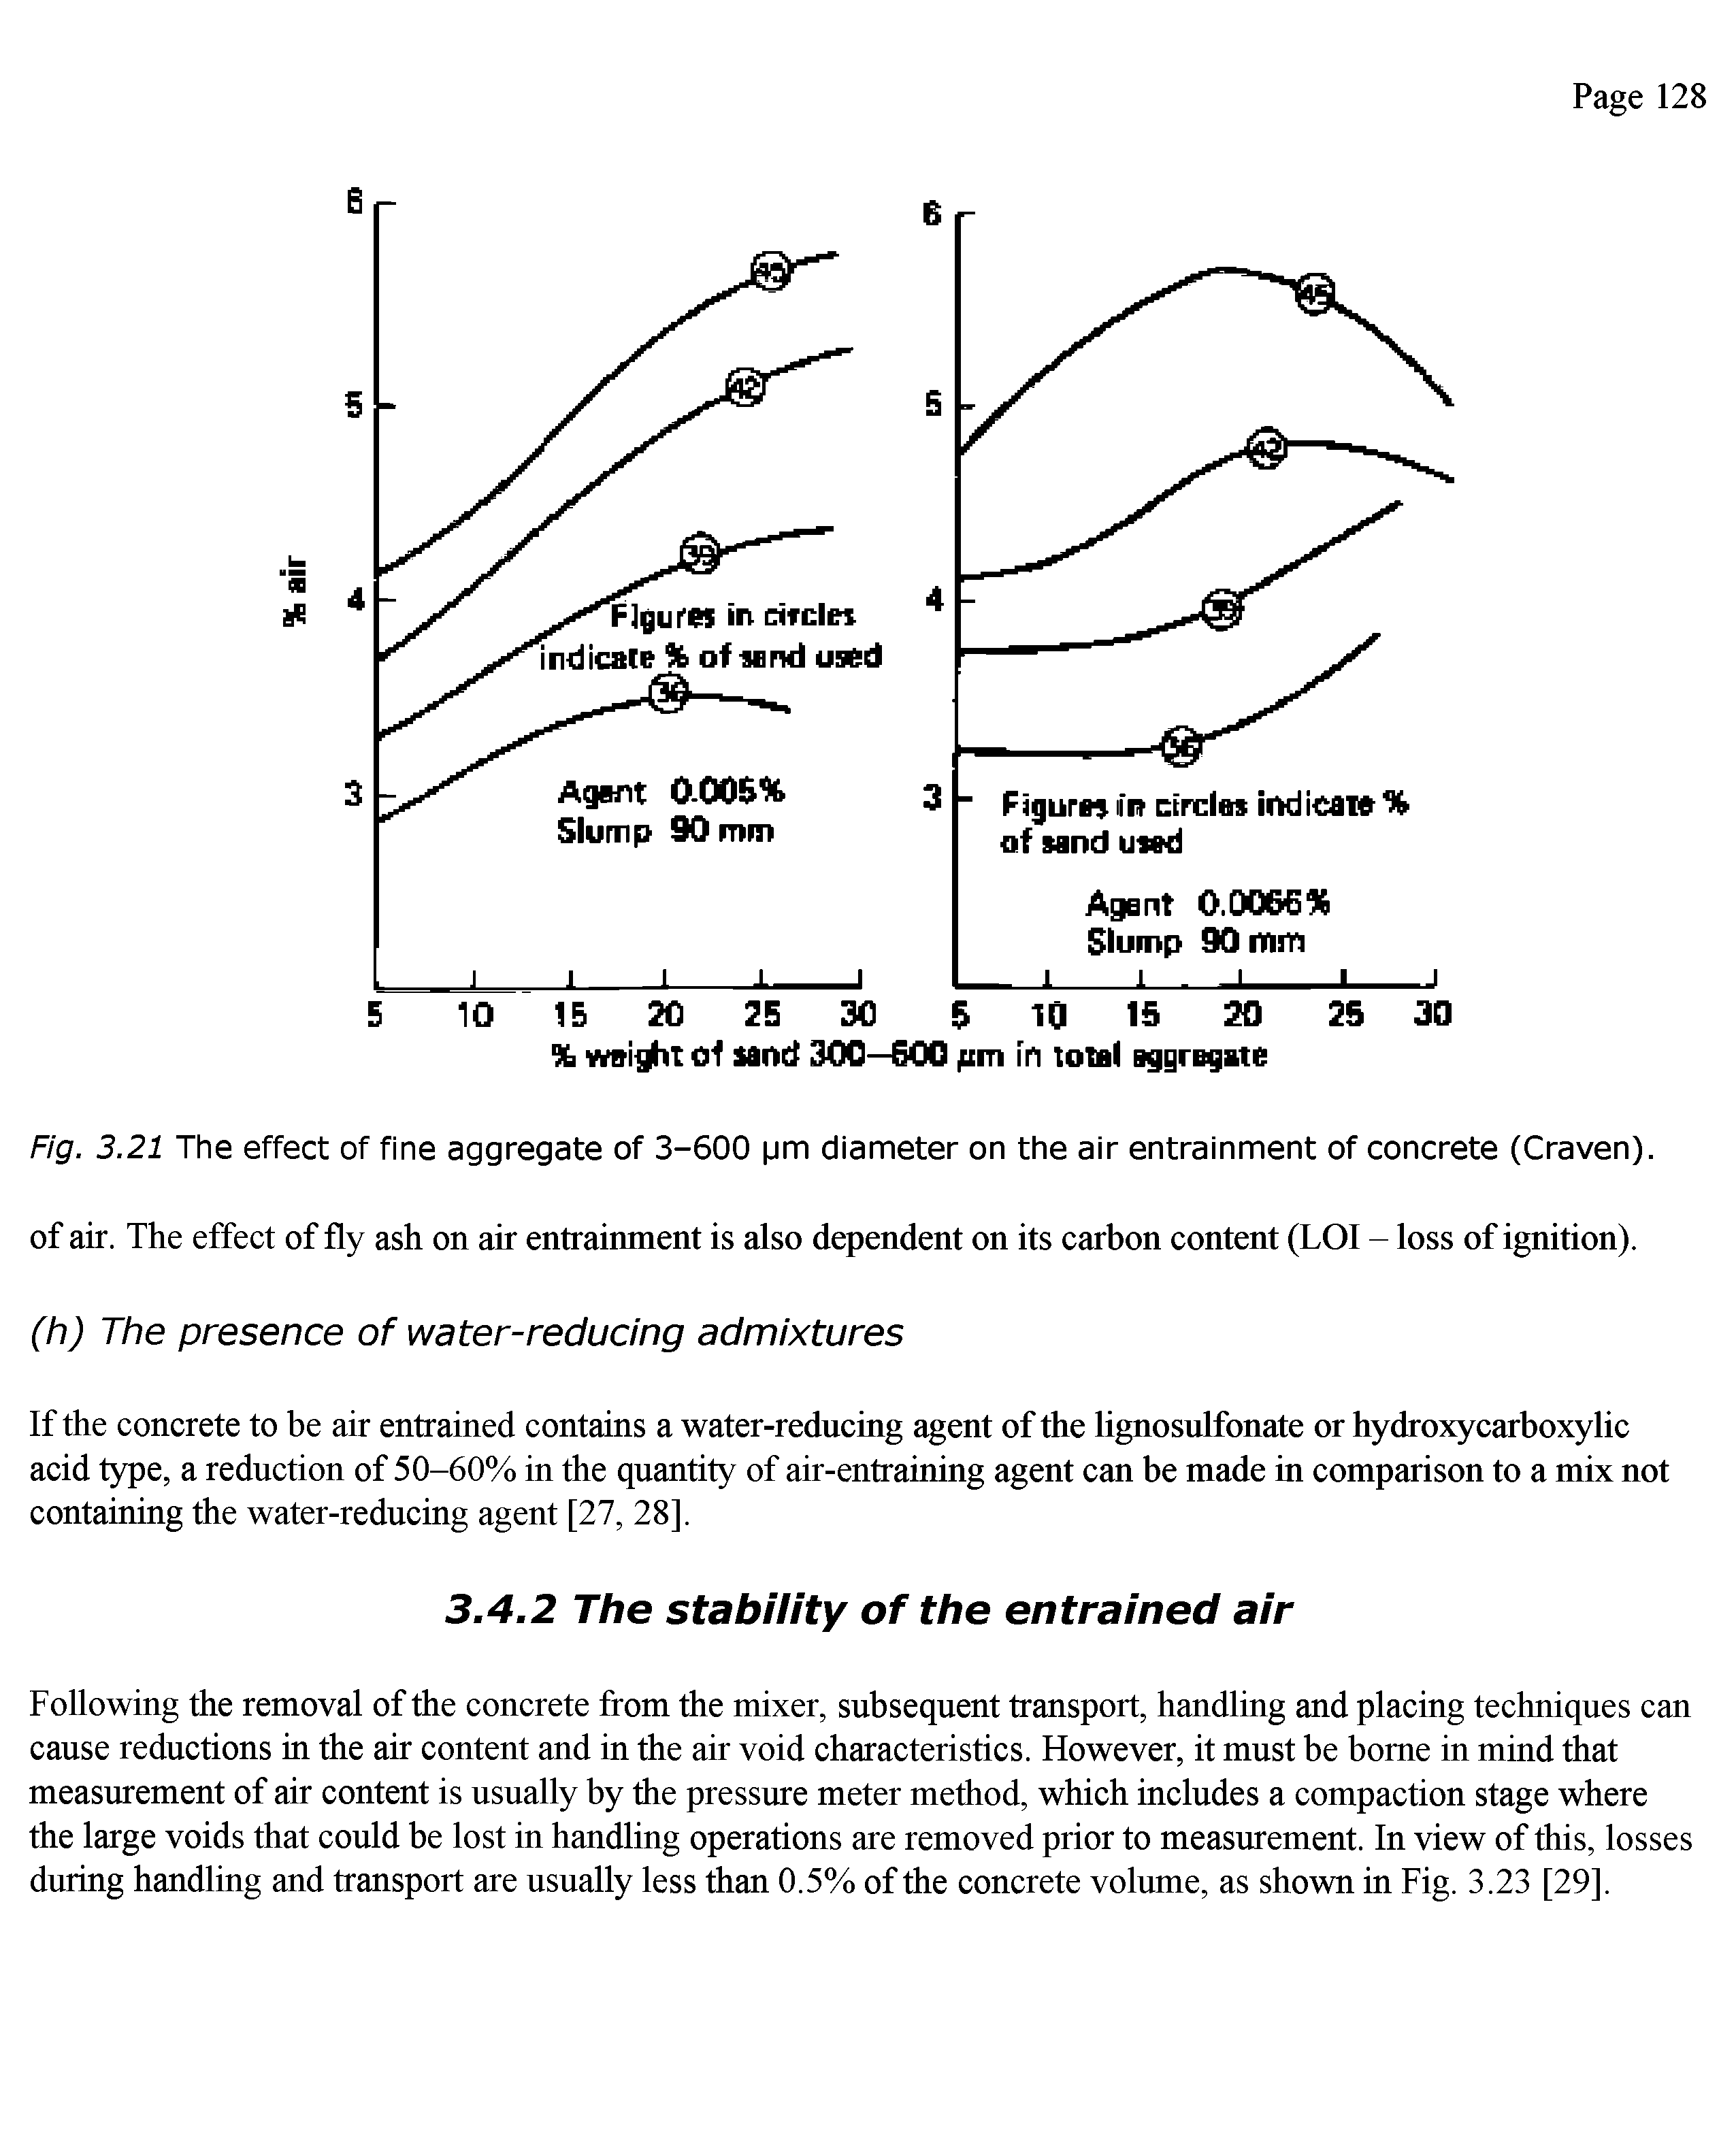 Fig. 3.21 The effect of fine aggregate of 3-600 pm diameter on the air entrainment of concrete (Craven), of air. The effect of fly ash on air entrainment is also dependent on its carbon content (LOl - loss of ignition).